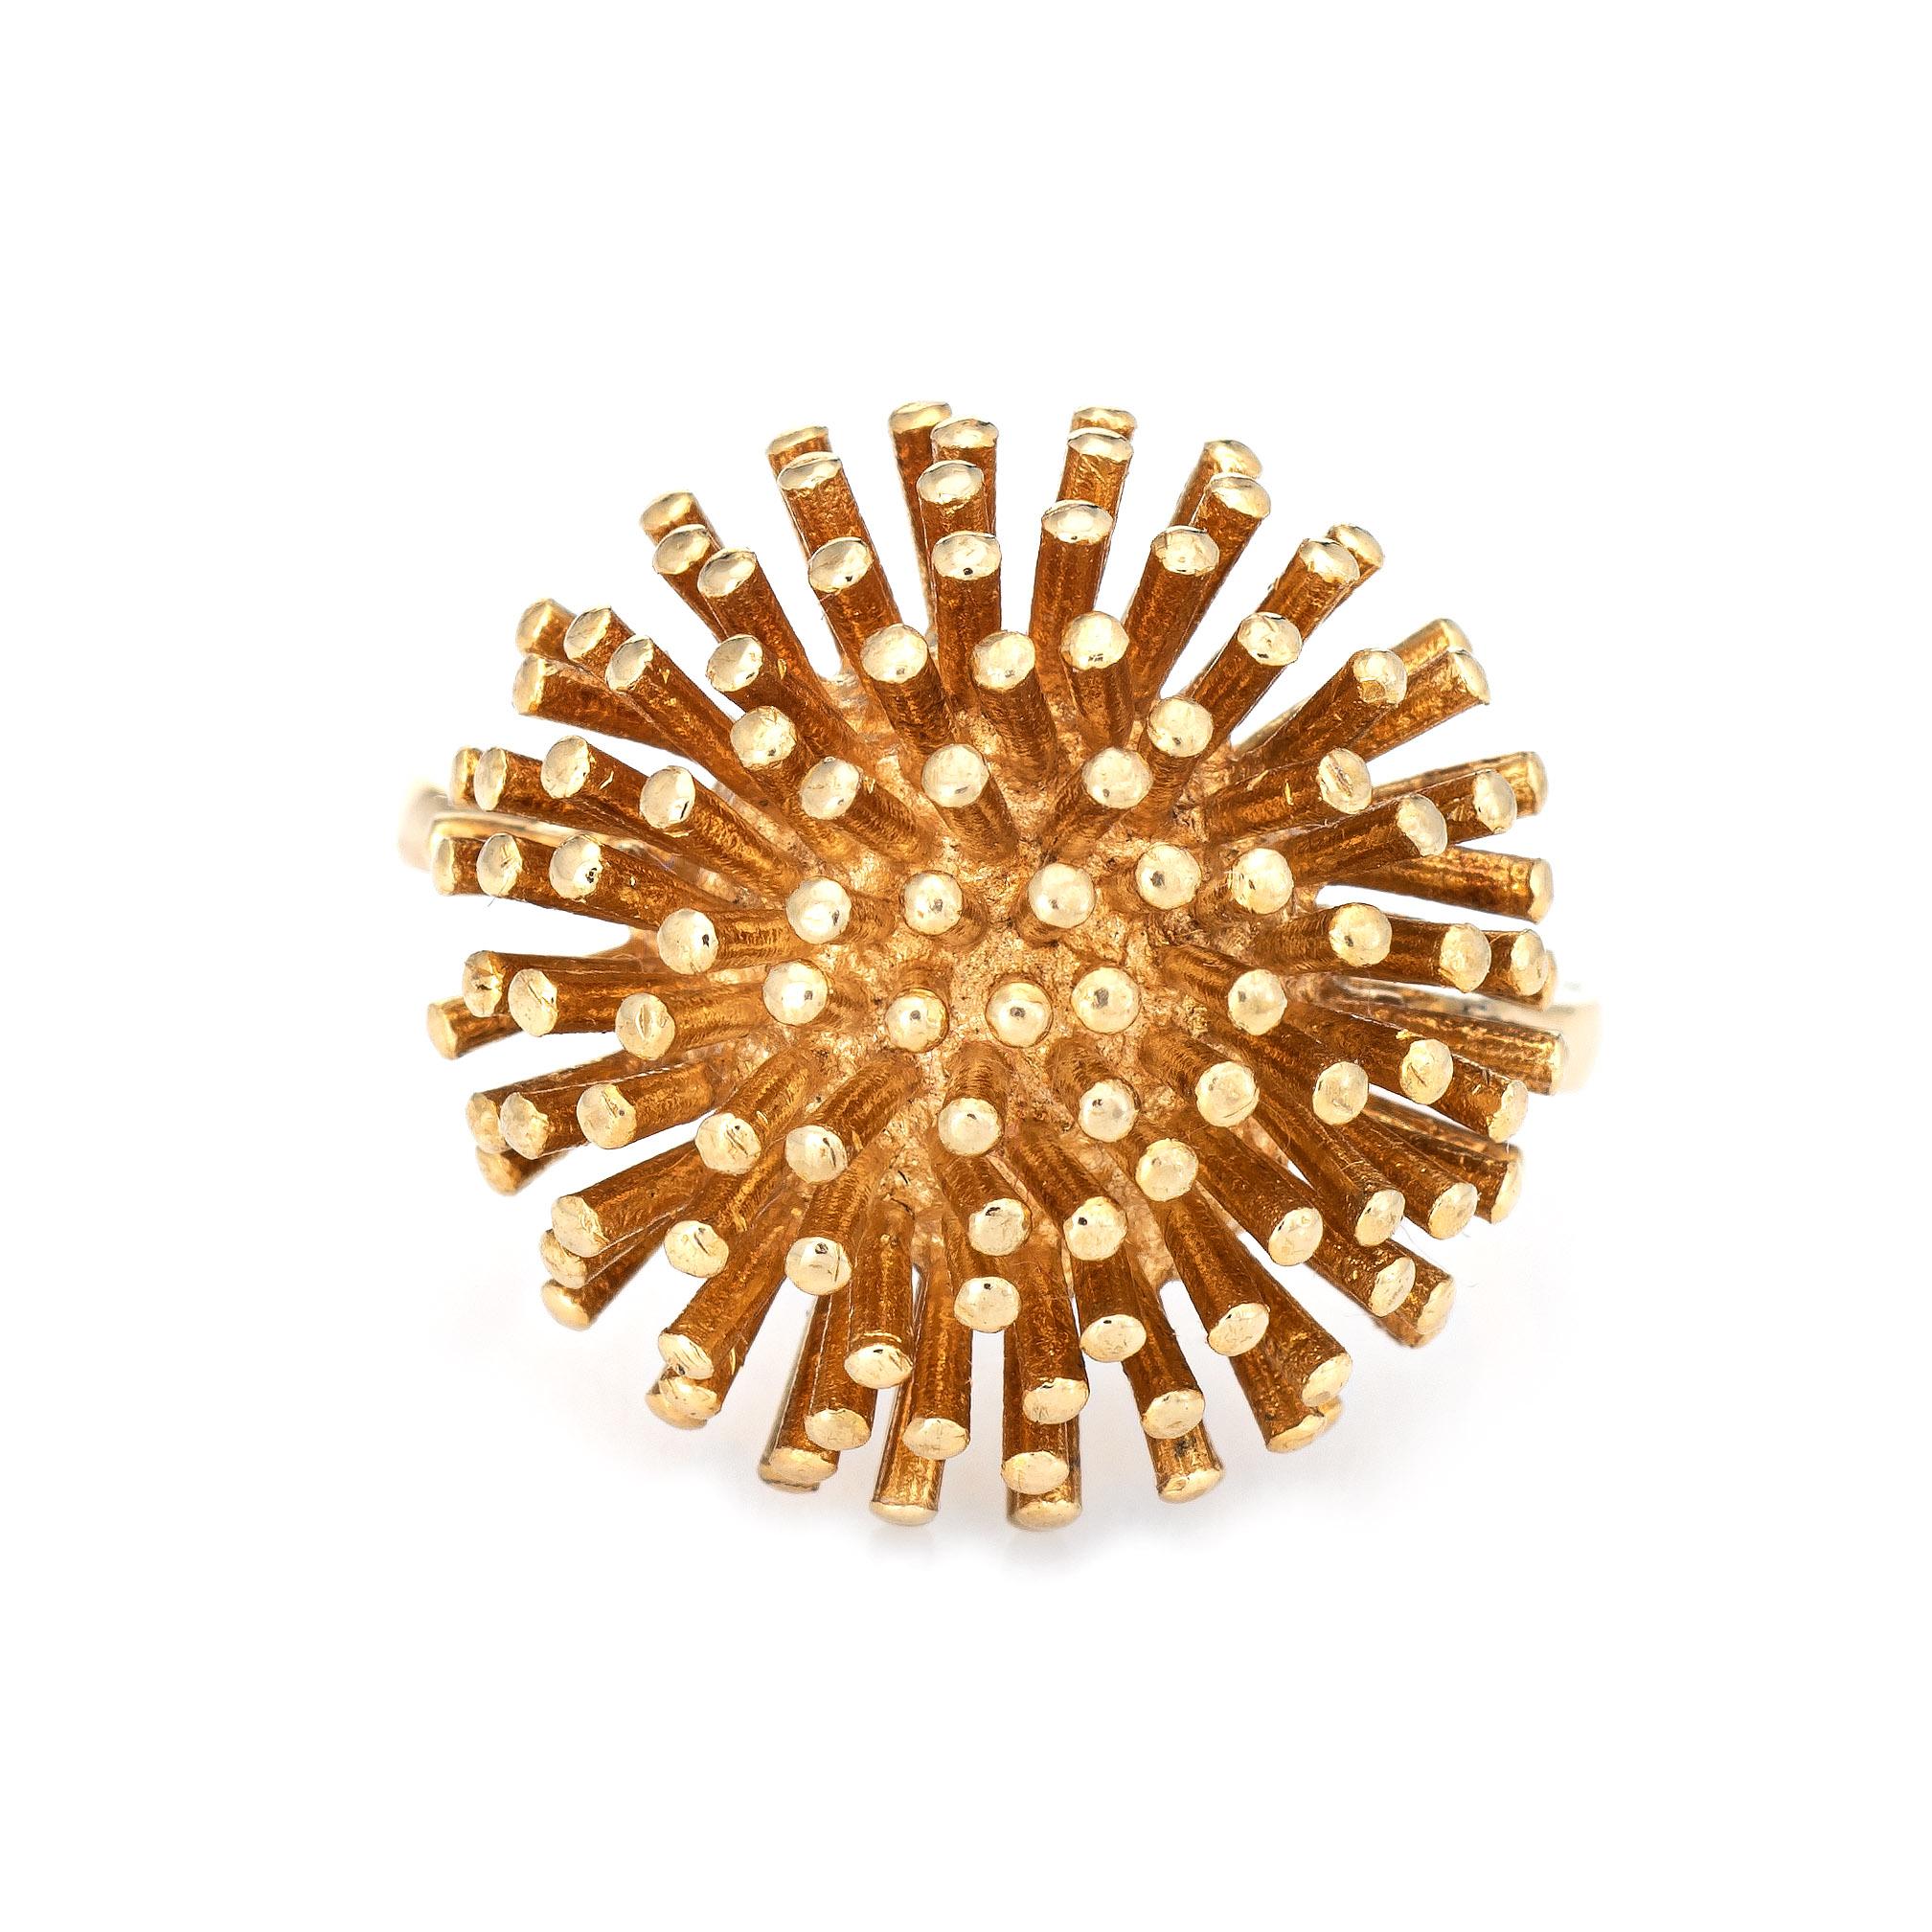 Stylish dandelion ring crafted in 18k yellow gold (circa 1980s to 1990s). 

The distinct ring features an array of gold points arranged in the form of a dandelion. The domed ring makes a great statement on the hand. The medium rise ring (9.5mm -